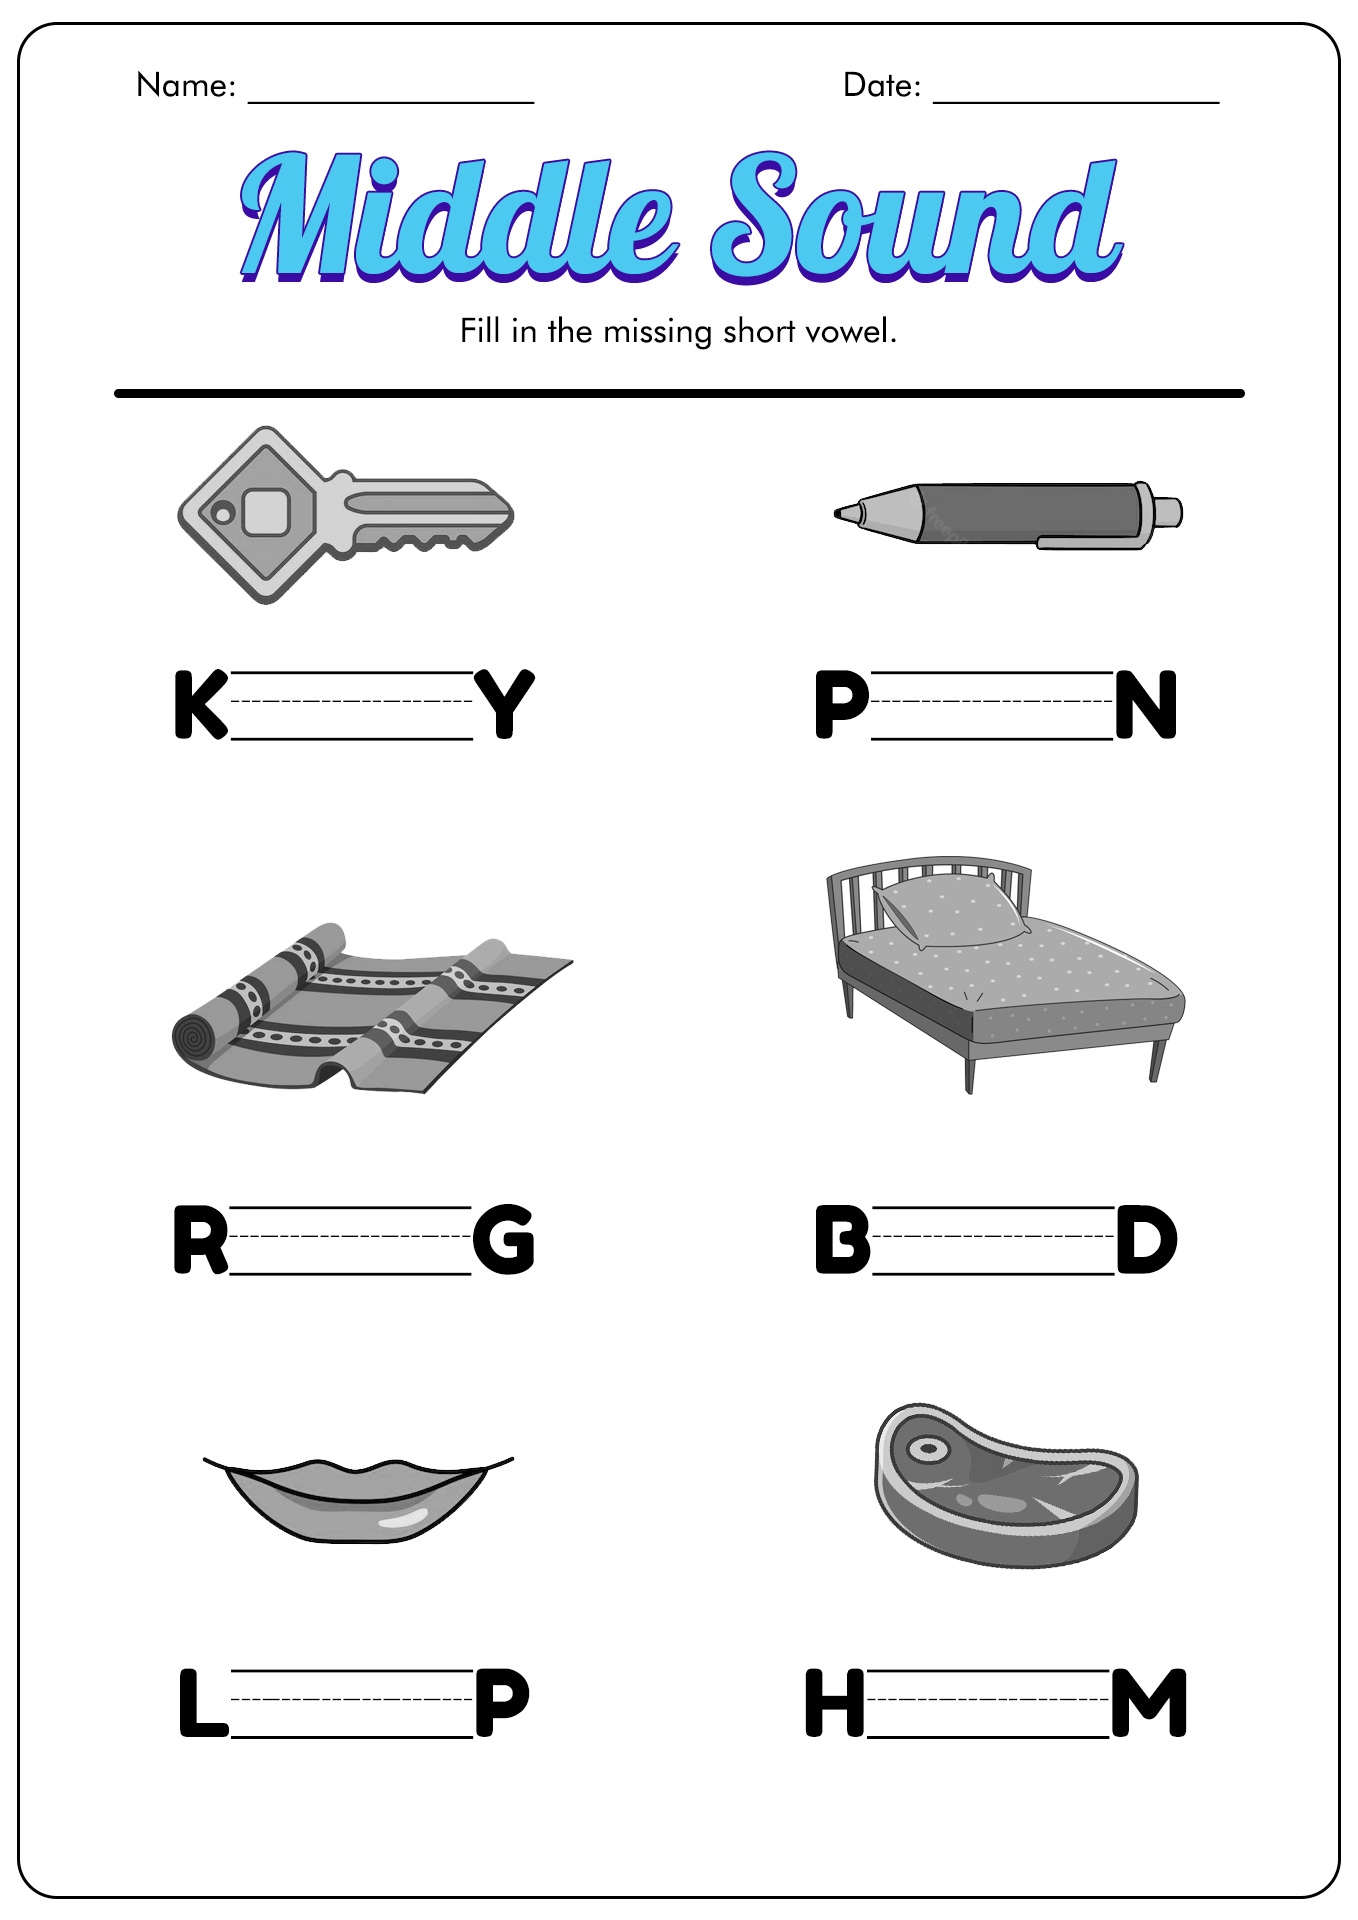 Middle Sound Review Worksheet Image